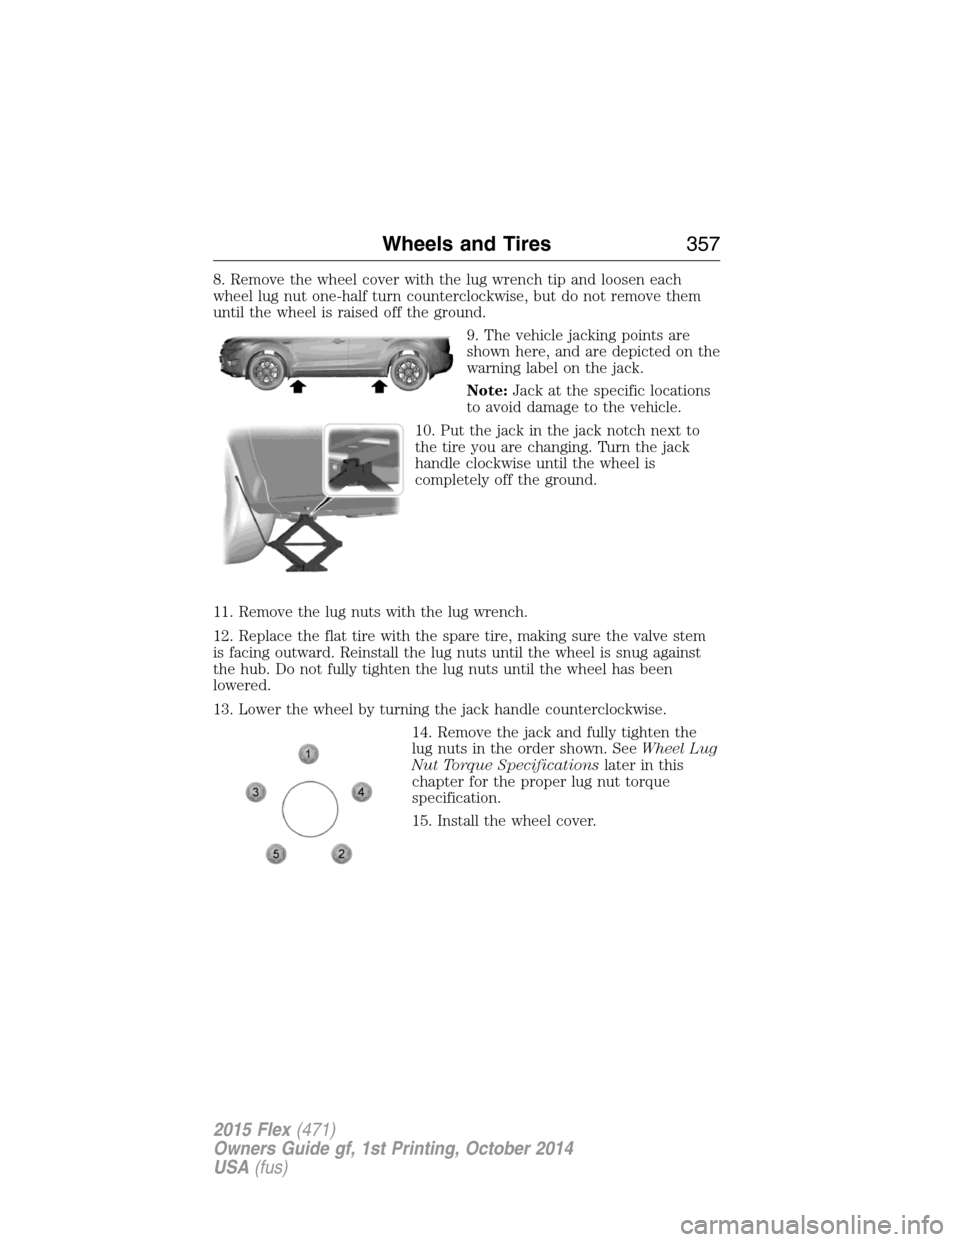 FORD FLEX 2015 1.G Owners Manual 8. Remove the wheel cover with the lug wrench tip and loosen each
wheel lug nut one-half turn counterclockwise, but do not remove them
until the wheel is raised off the ground.
9. The vehicle jacking 